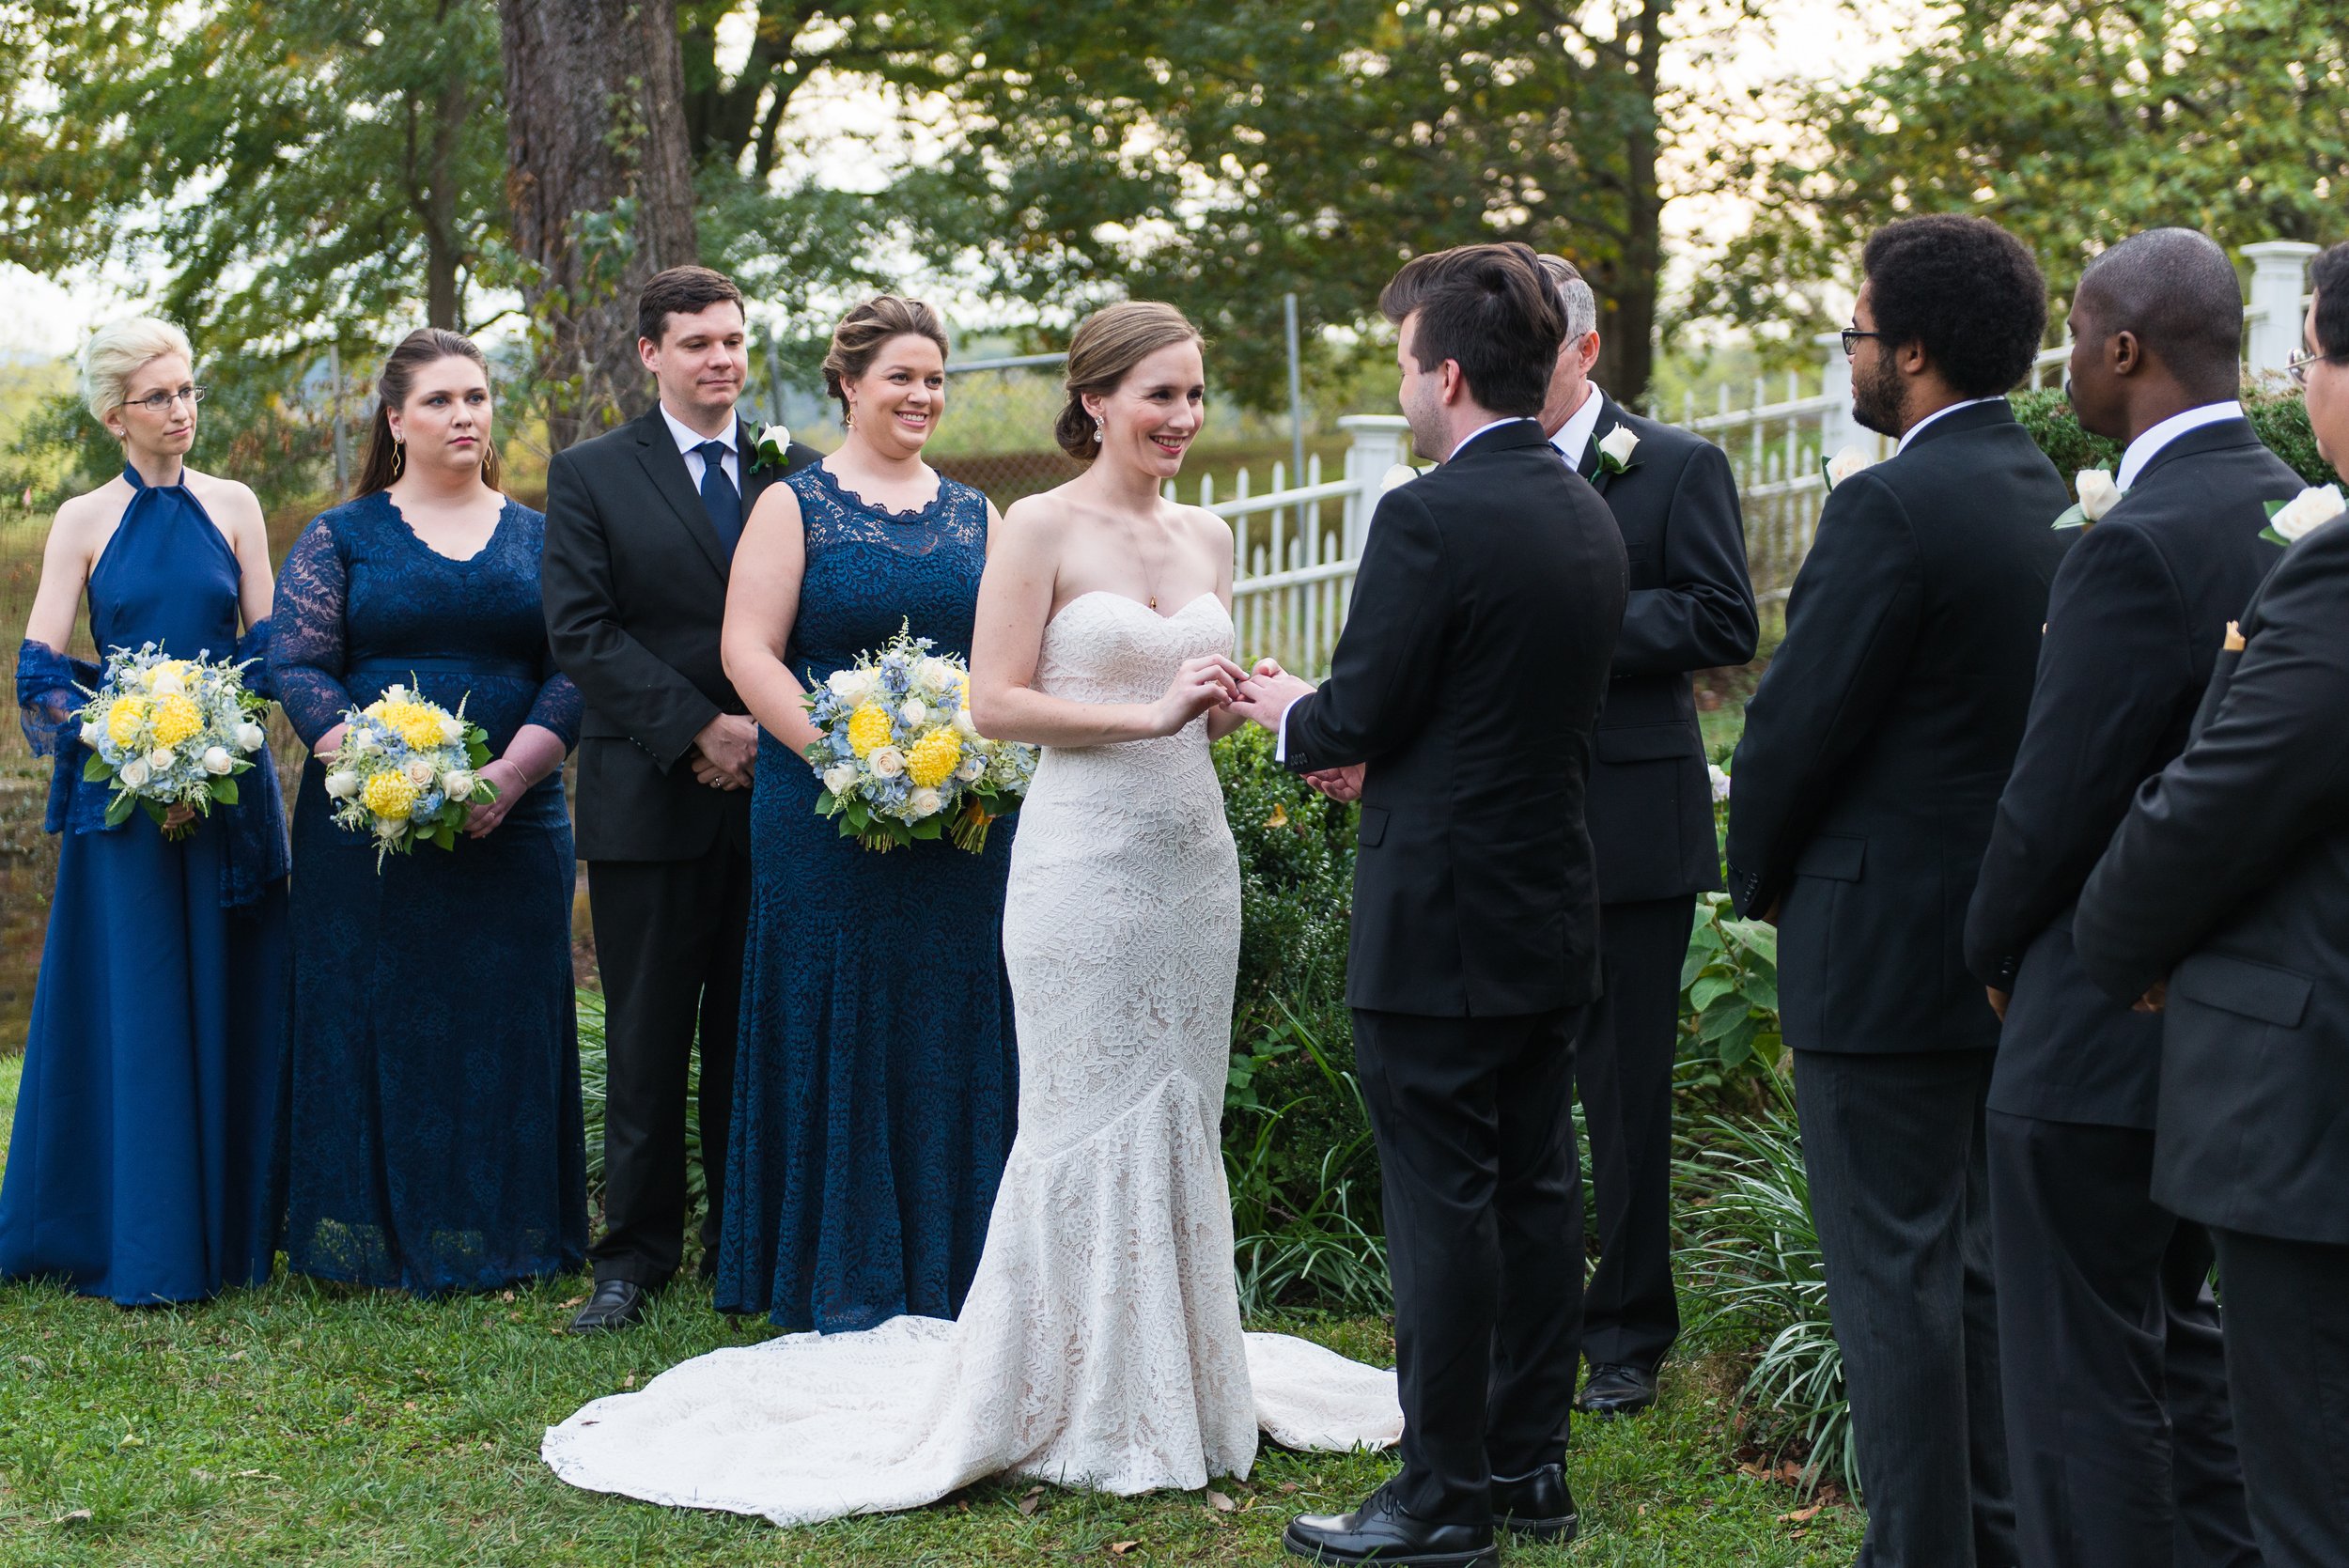 A garden ceremony at one of the best wedding venues in Loudoun County Virginia